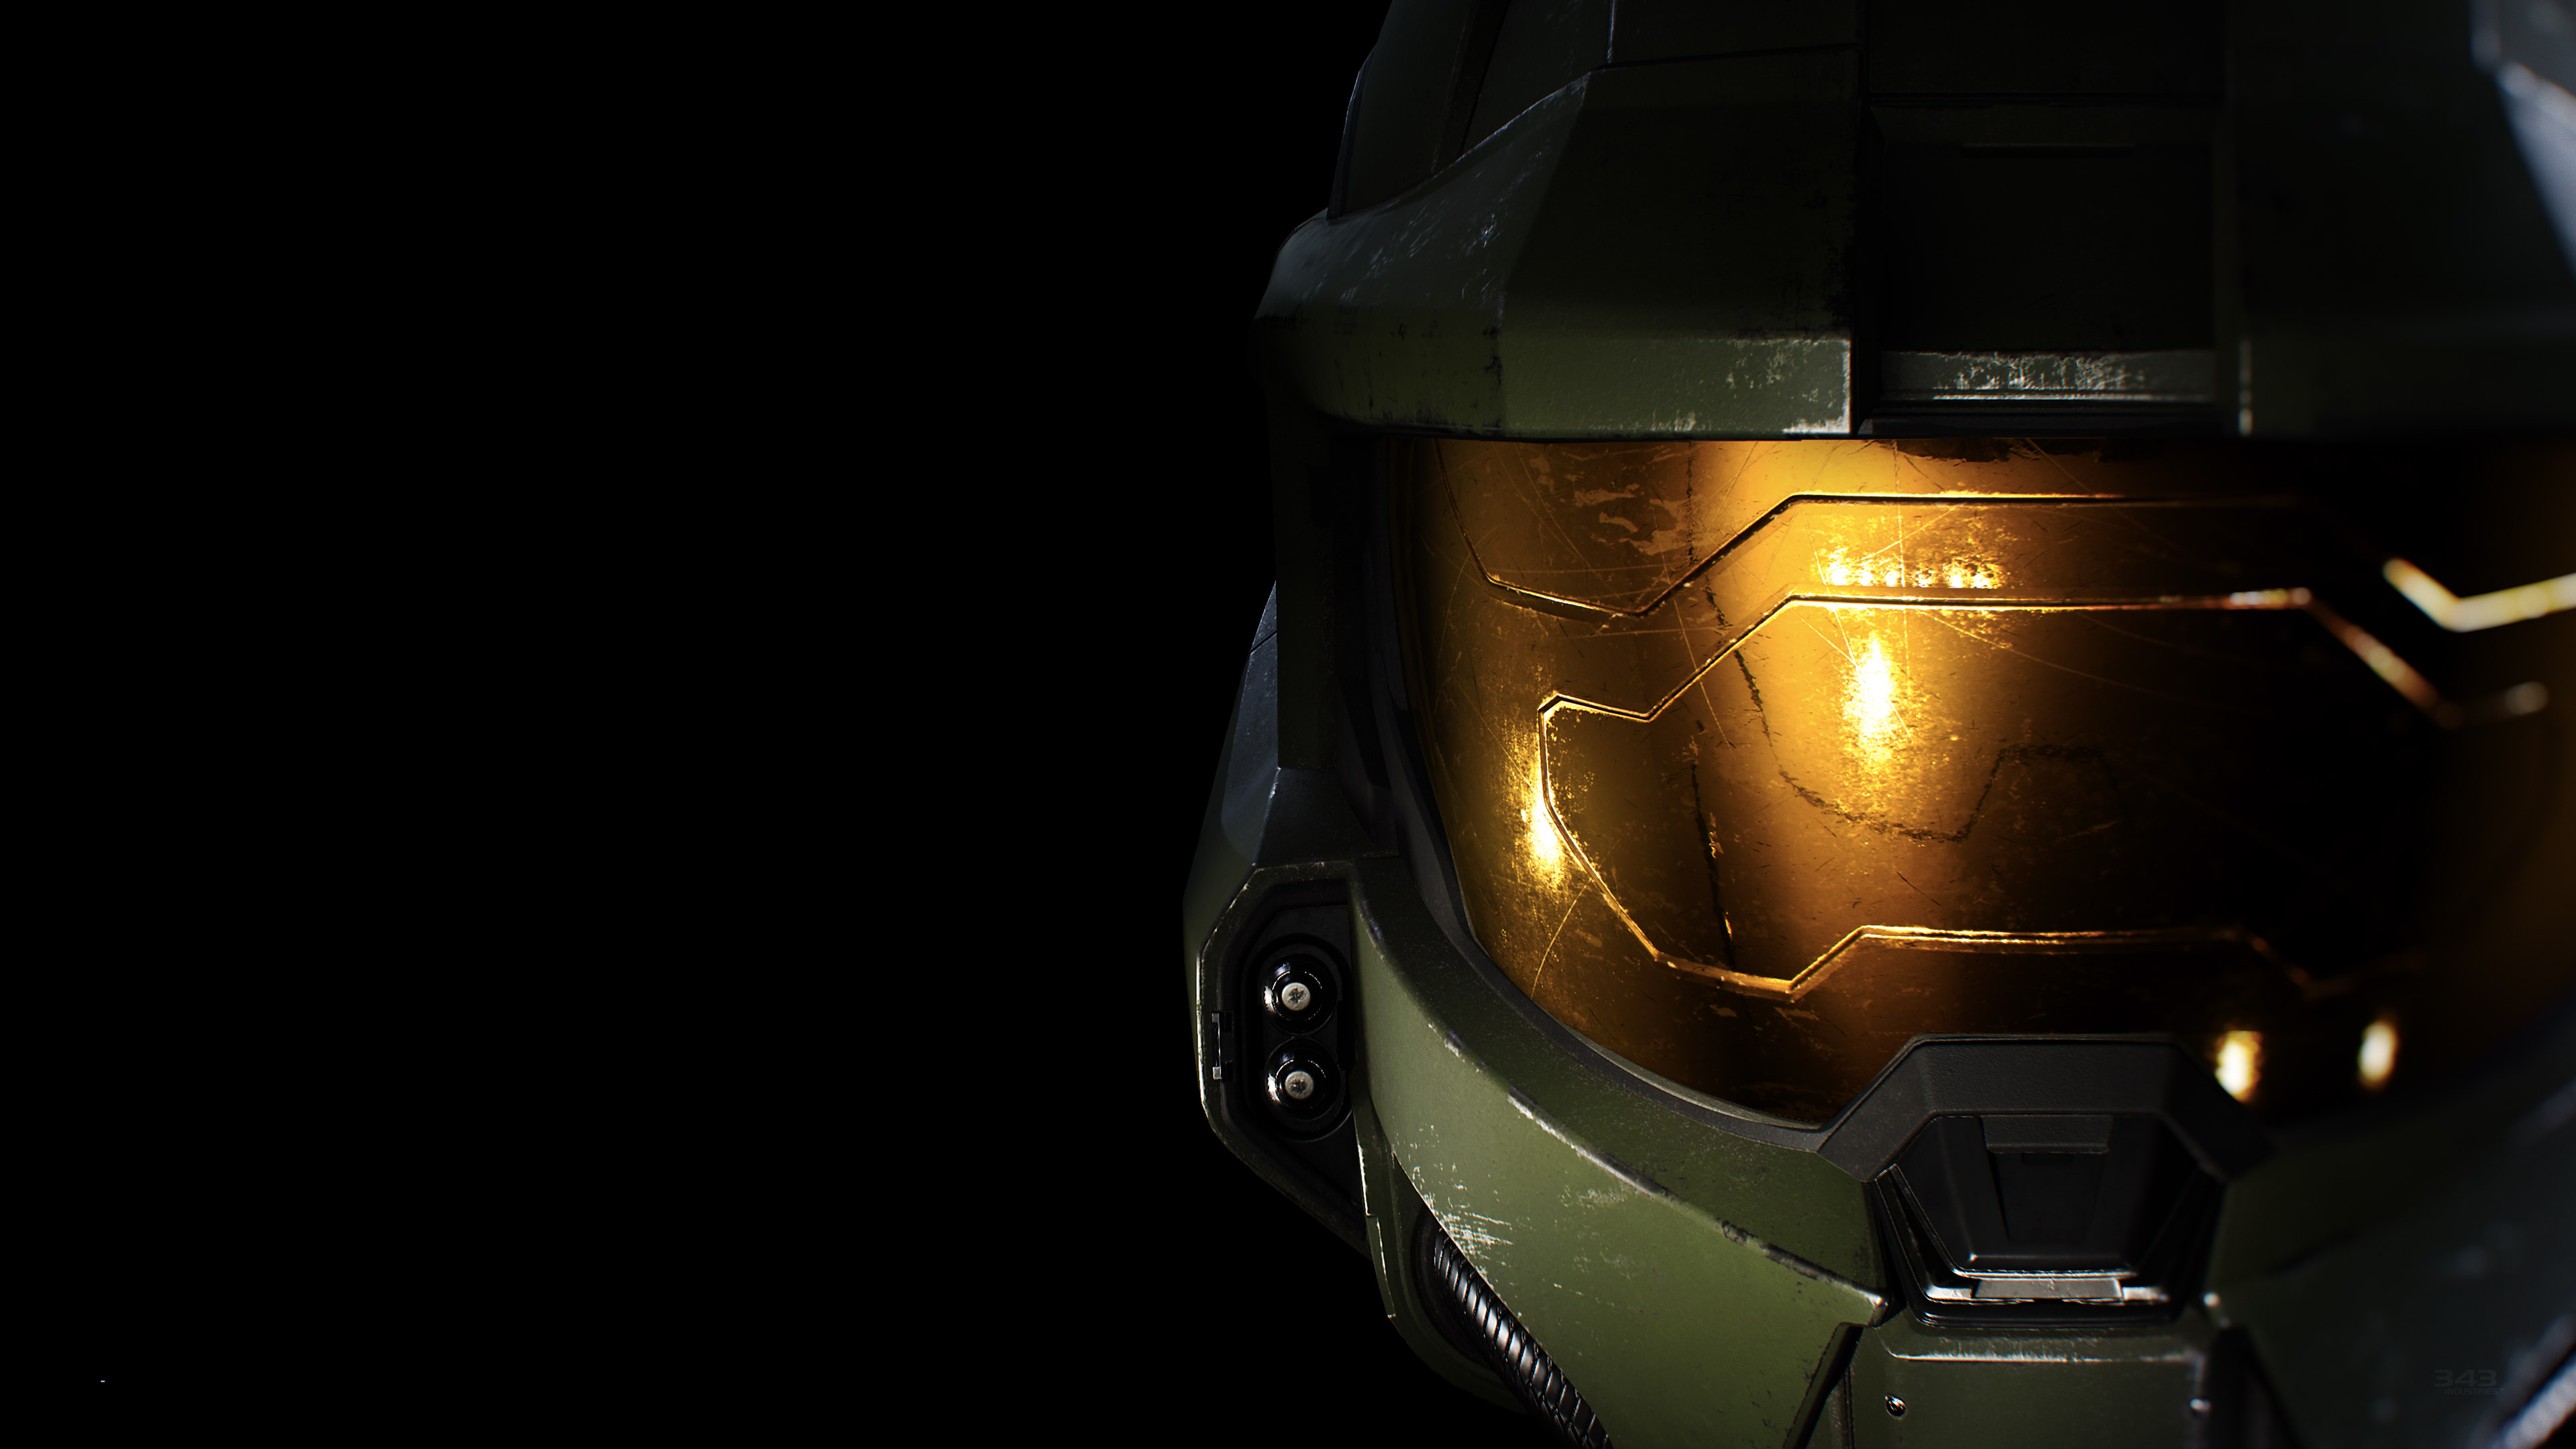 Halo Infinite gameplay trailer to release during E3 2019